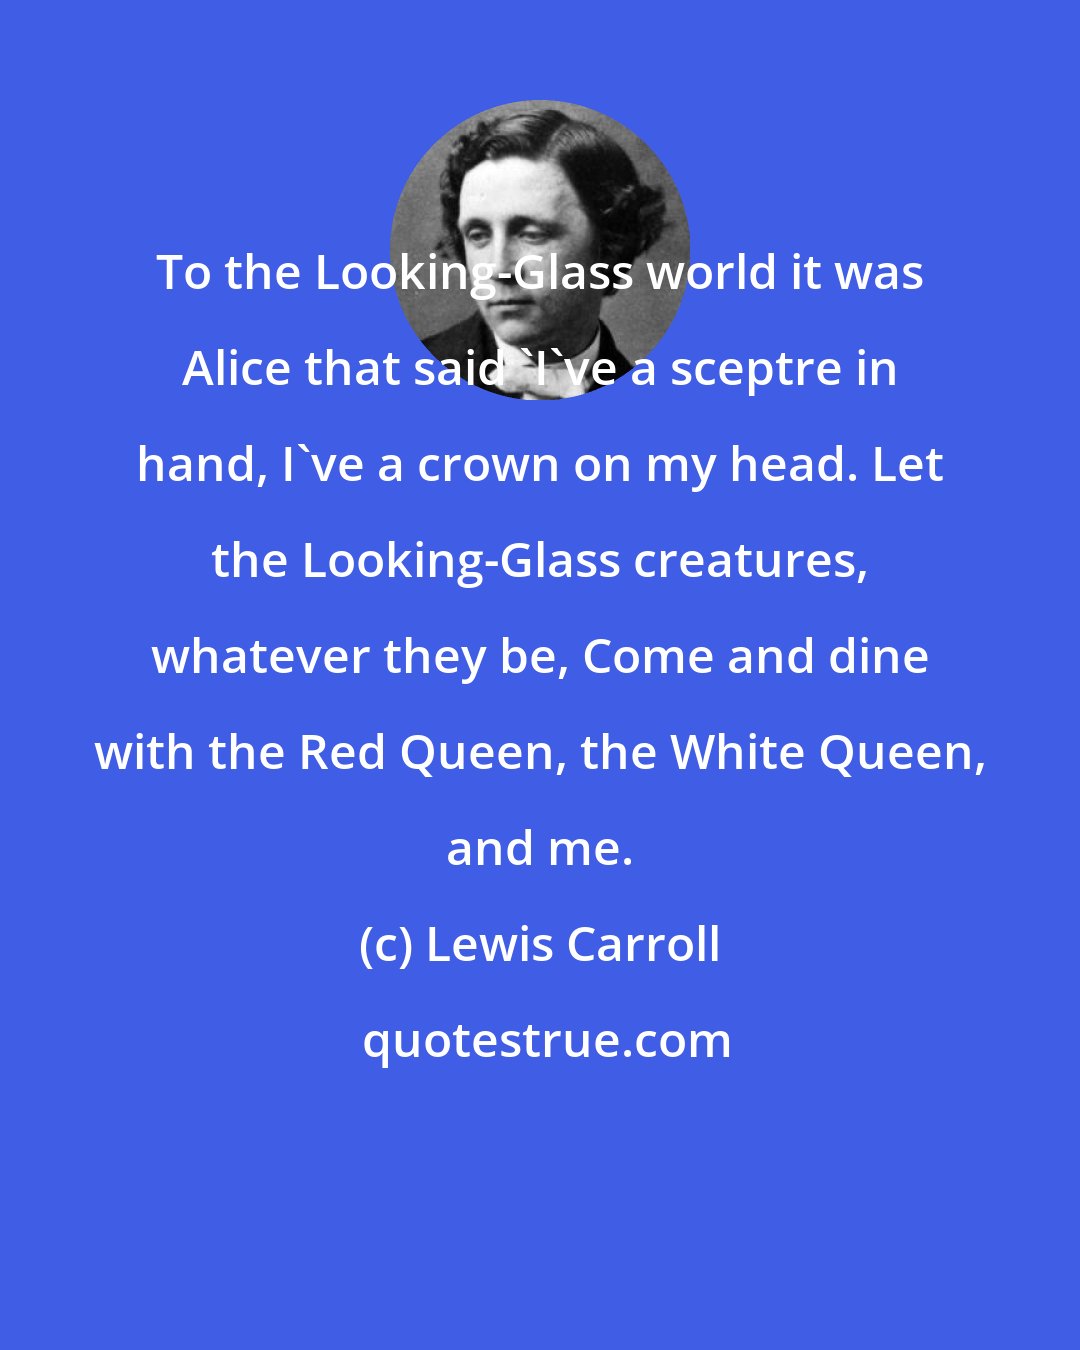 Lewis Carroll: To the Looking-Glass world it was Alice that said 'I've a sceptre in hand, I've a crown on my head. Let the Looking-Glass creatures, whatever they be, Come and dine with the Red Queen, the White Queen, and me.